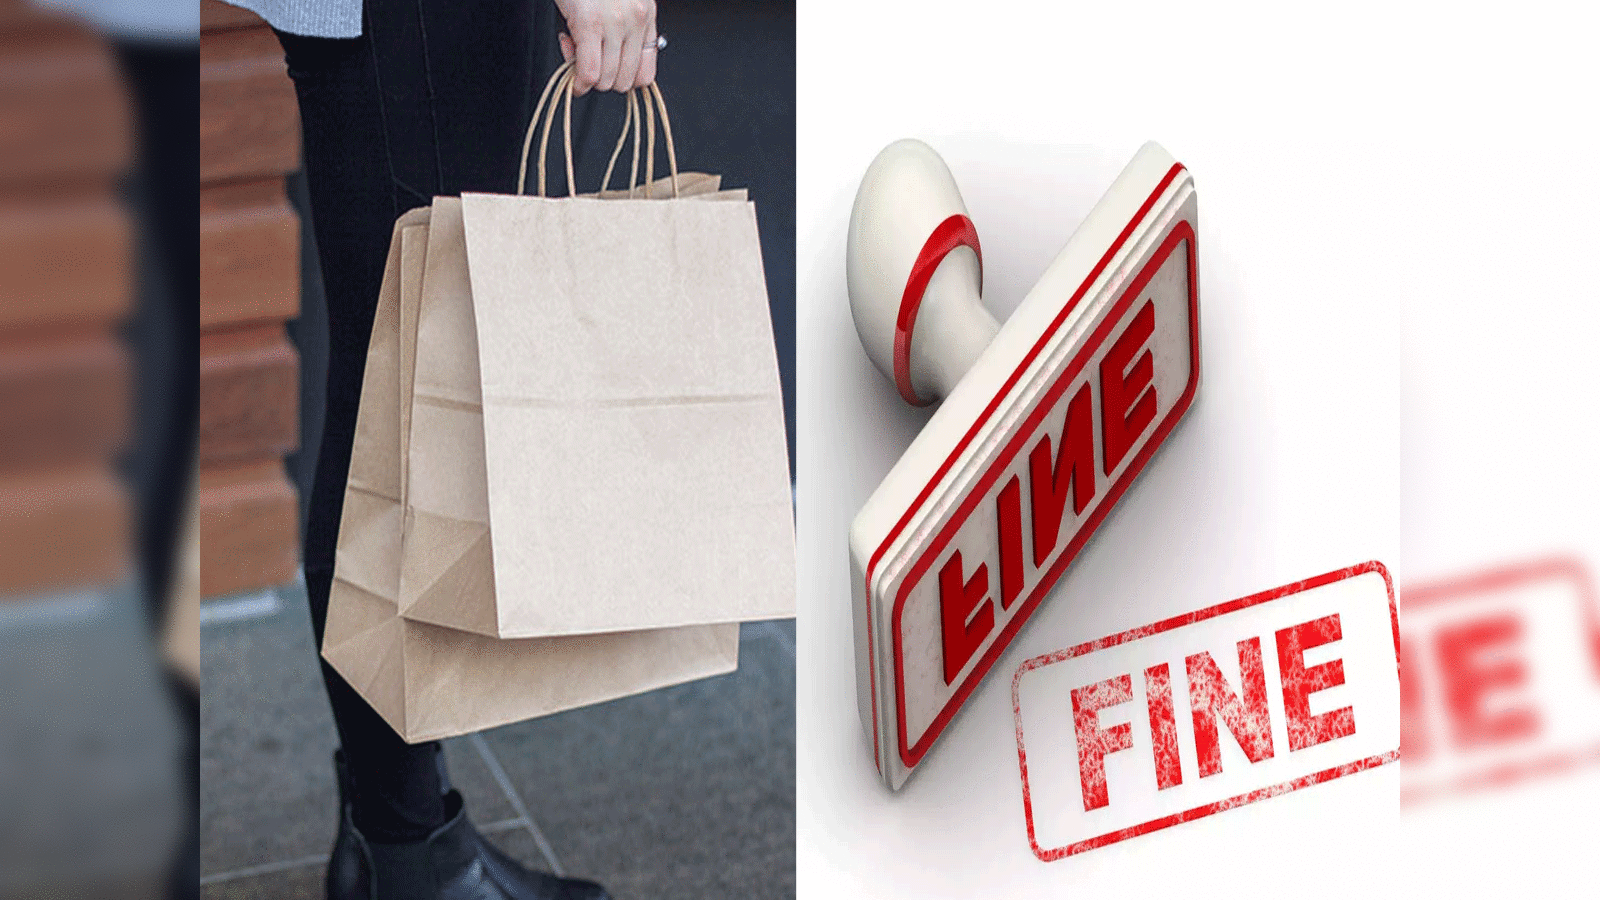 why retail stores still charge customers for carry bags despite courts deeming it unfair illegal